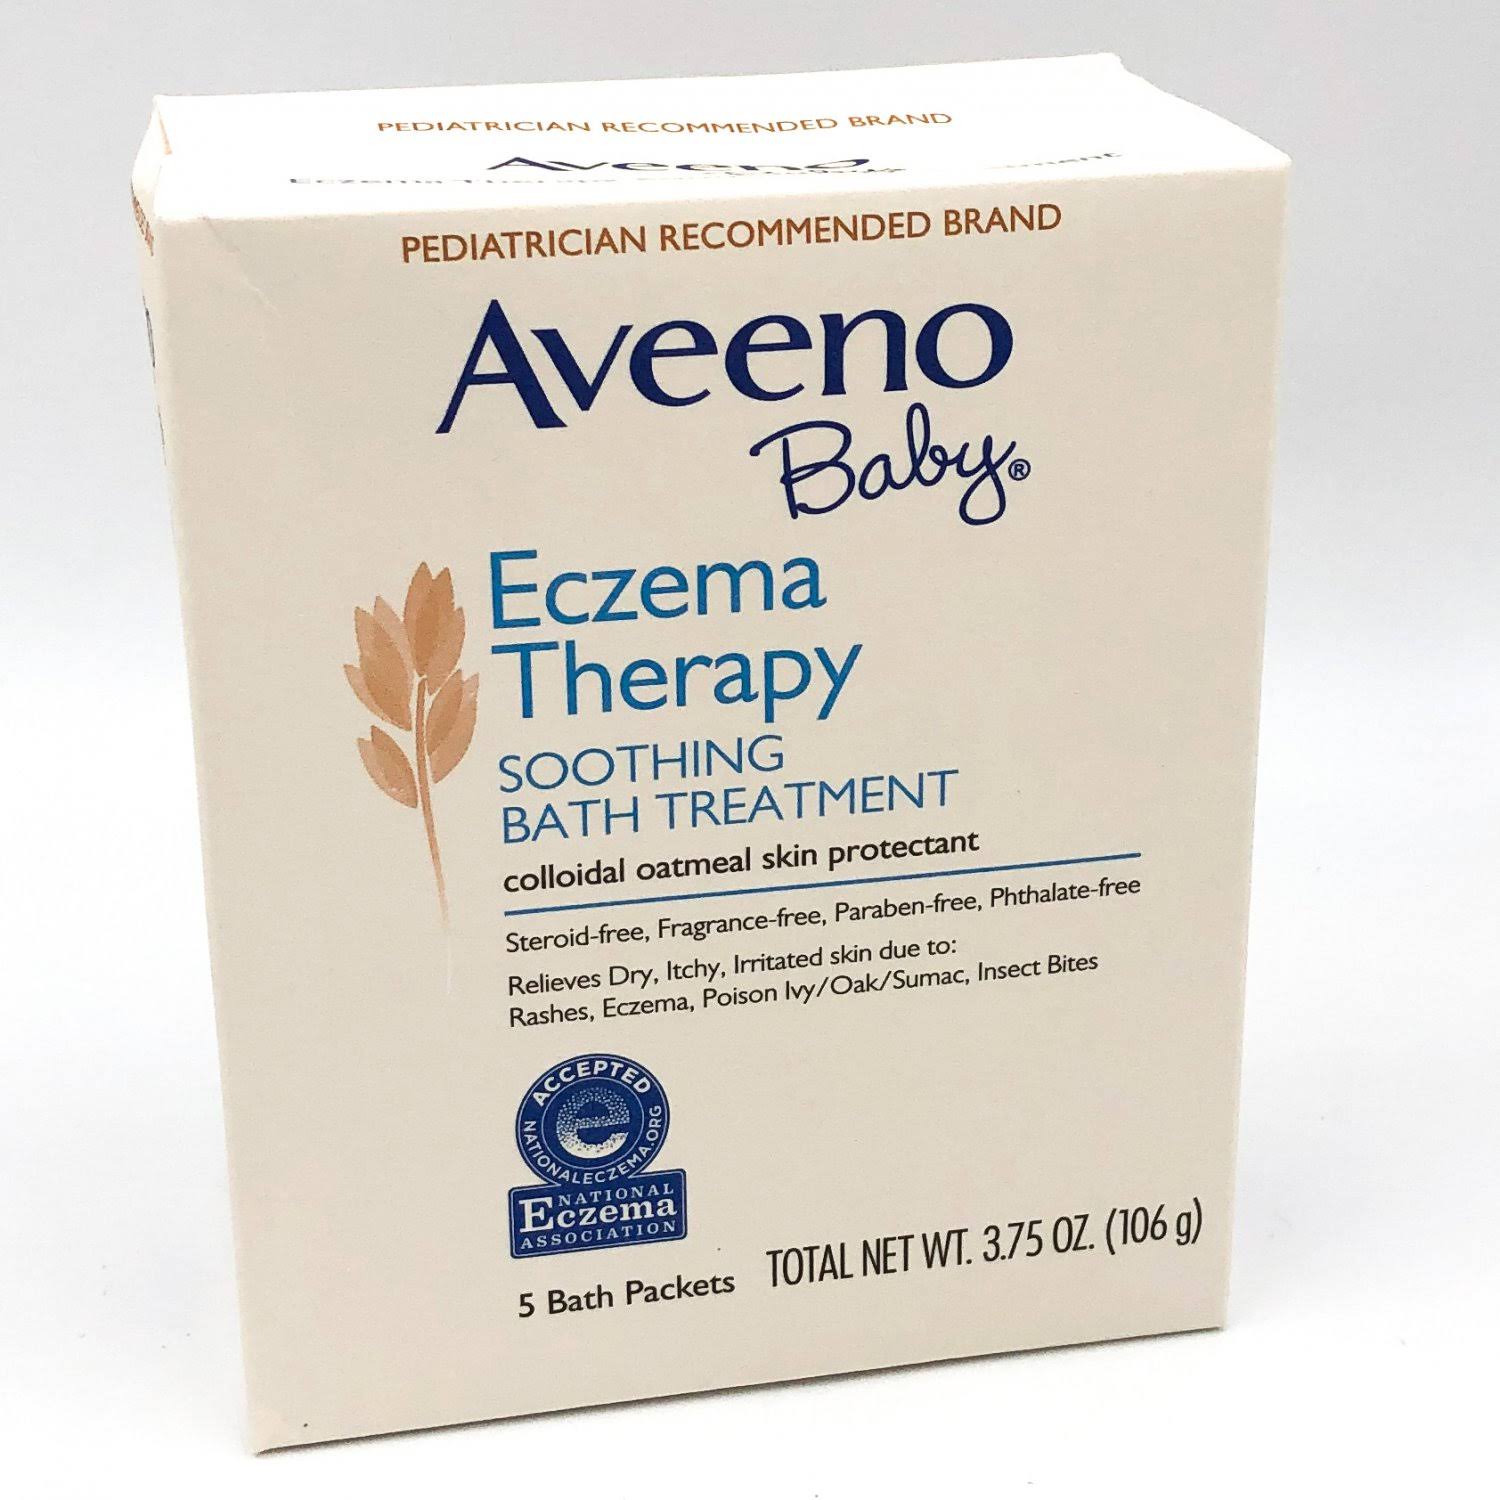 Aveeno Baby Eczema Therapy Soothing Bath Treatment - 5 x 3.75 Oz Pack